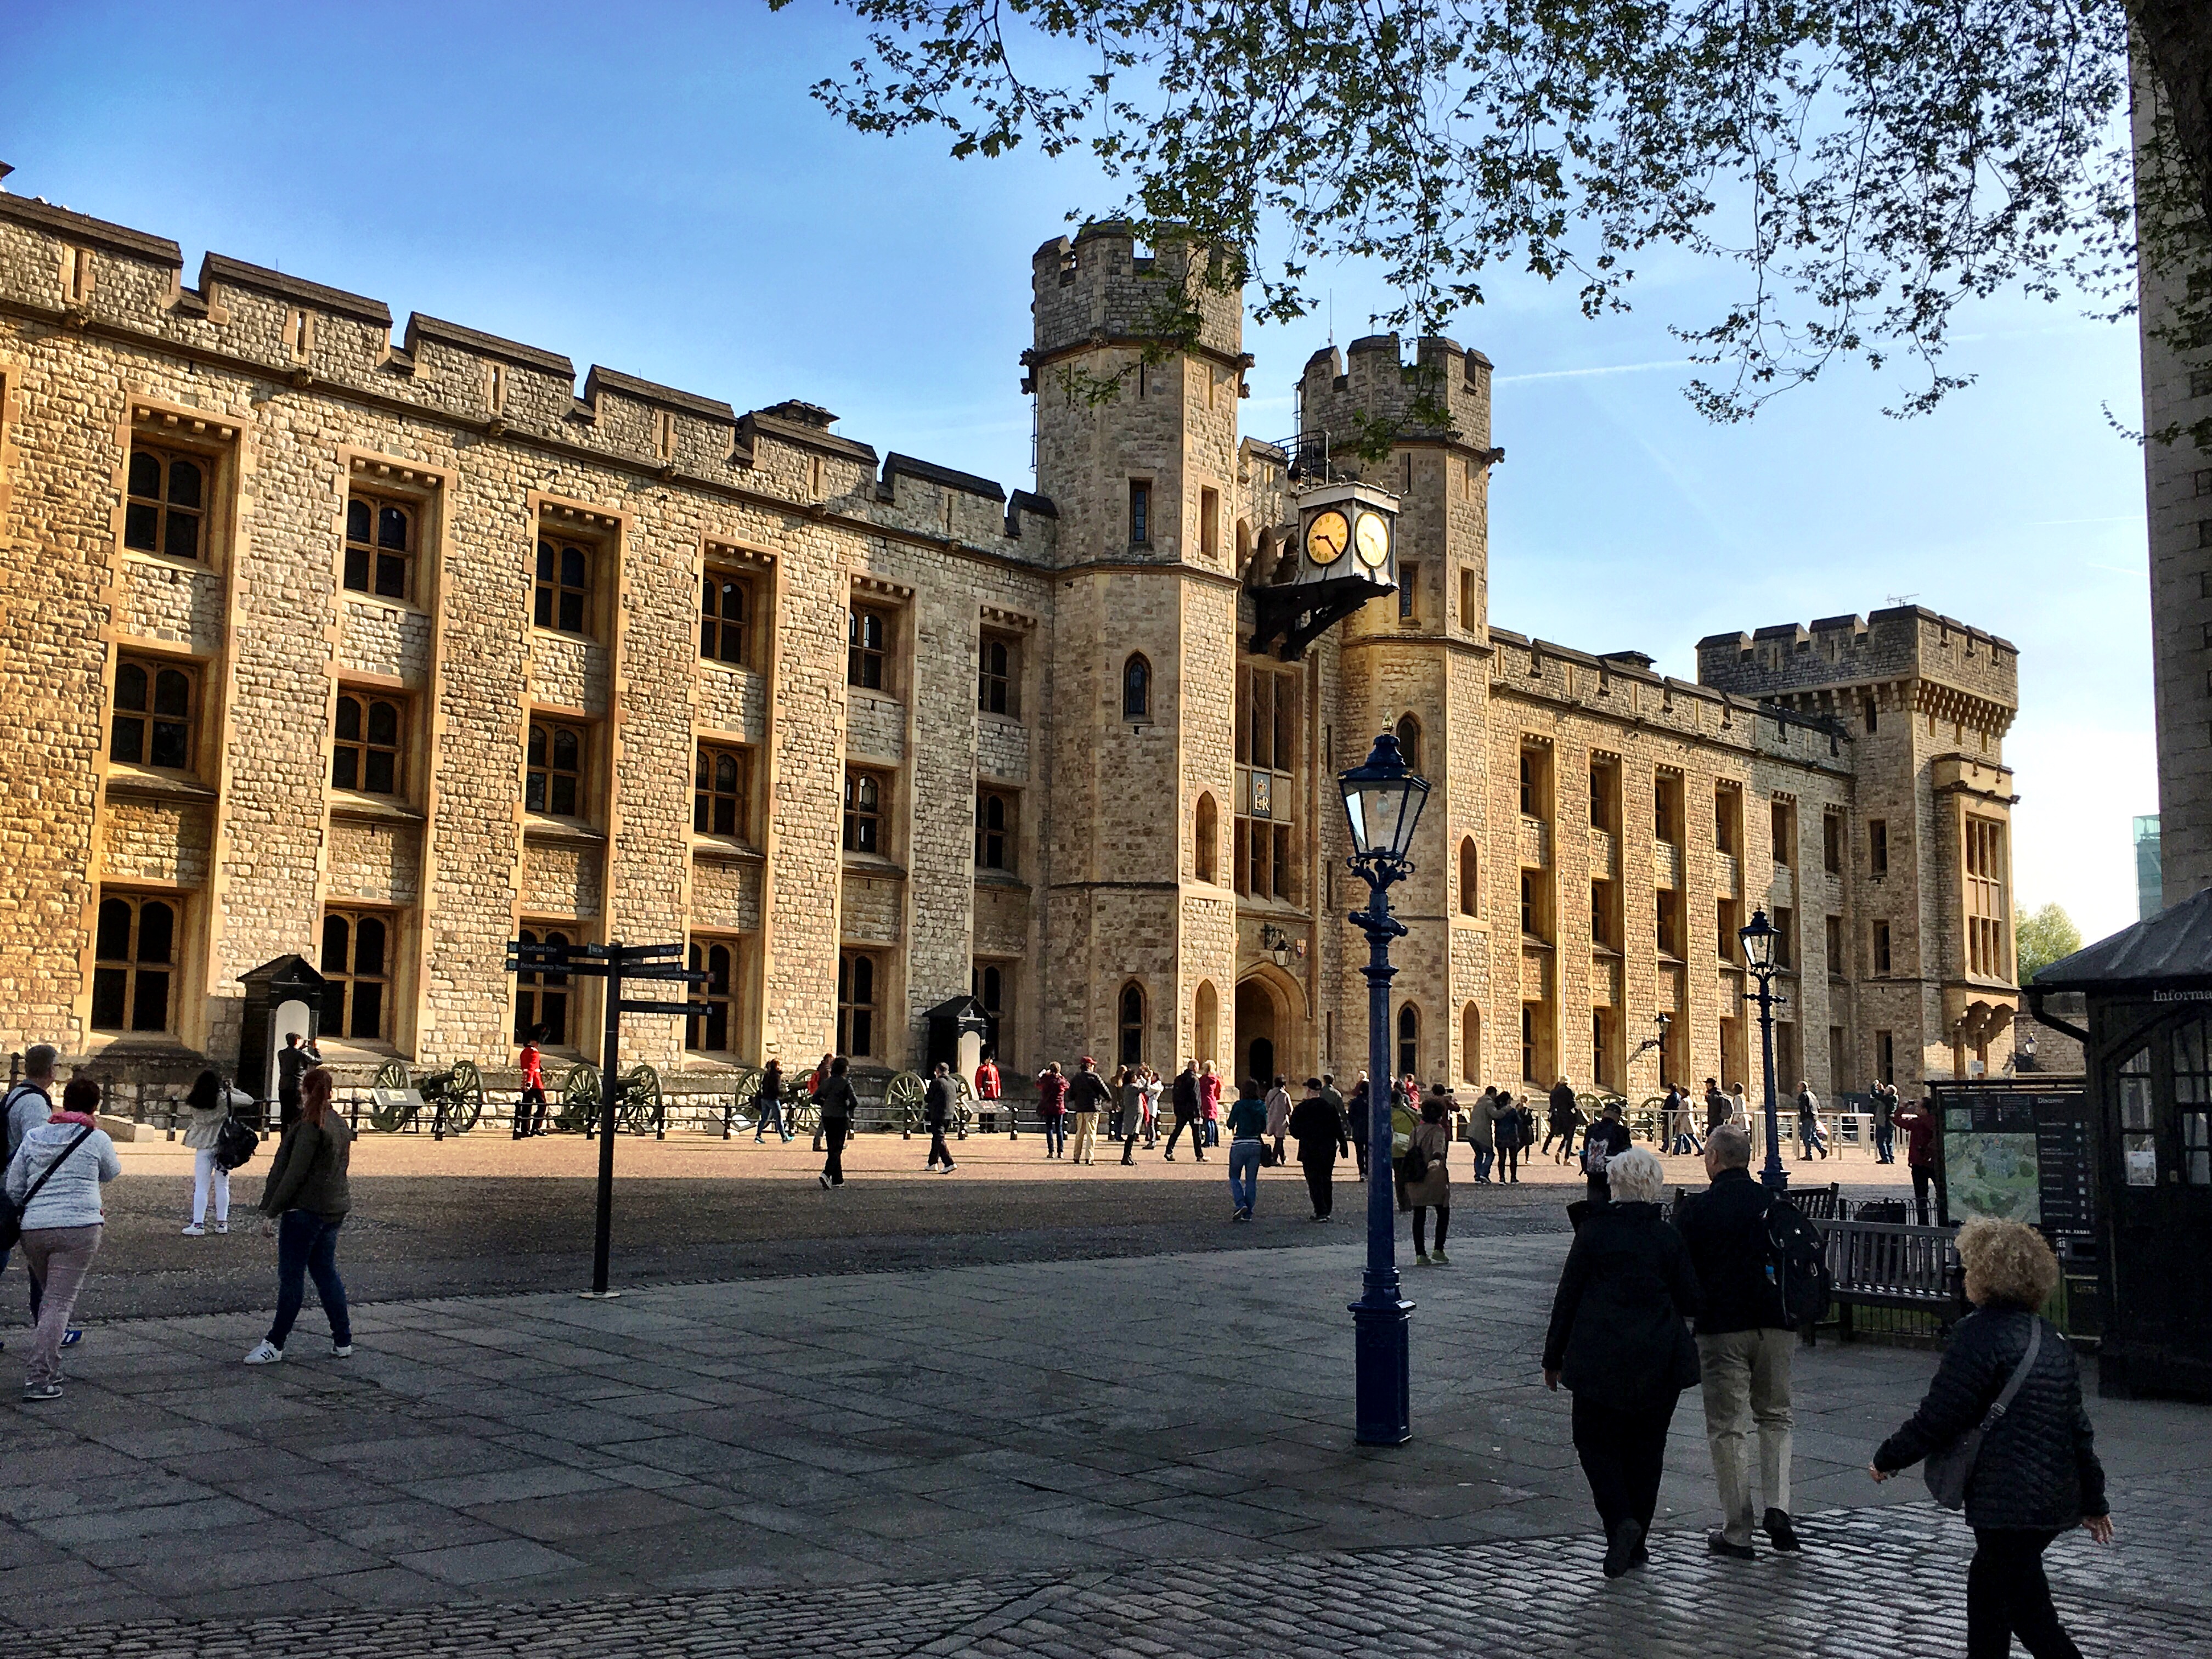 Tower of London - Home of the Crown Jewels